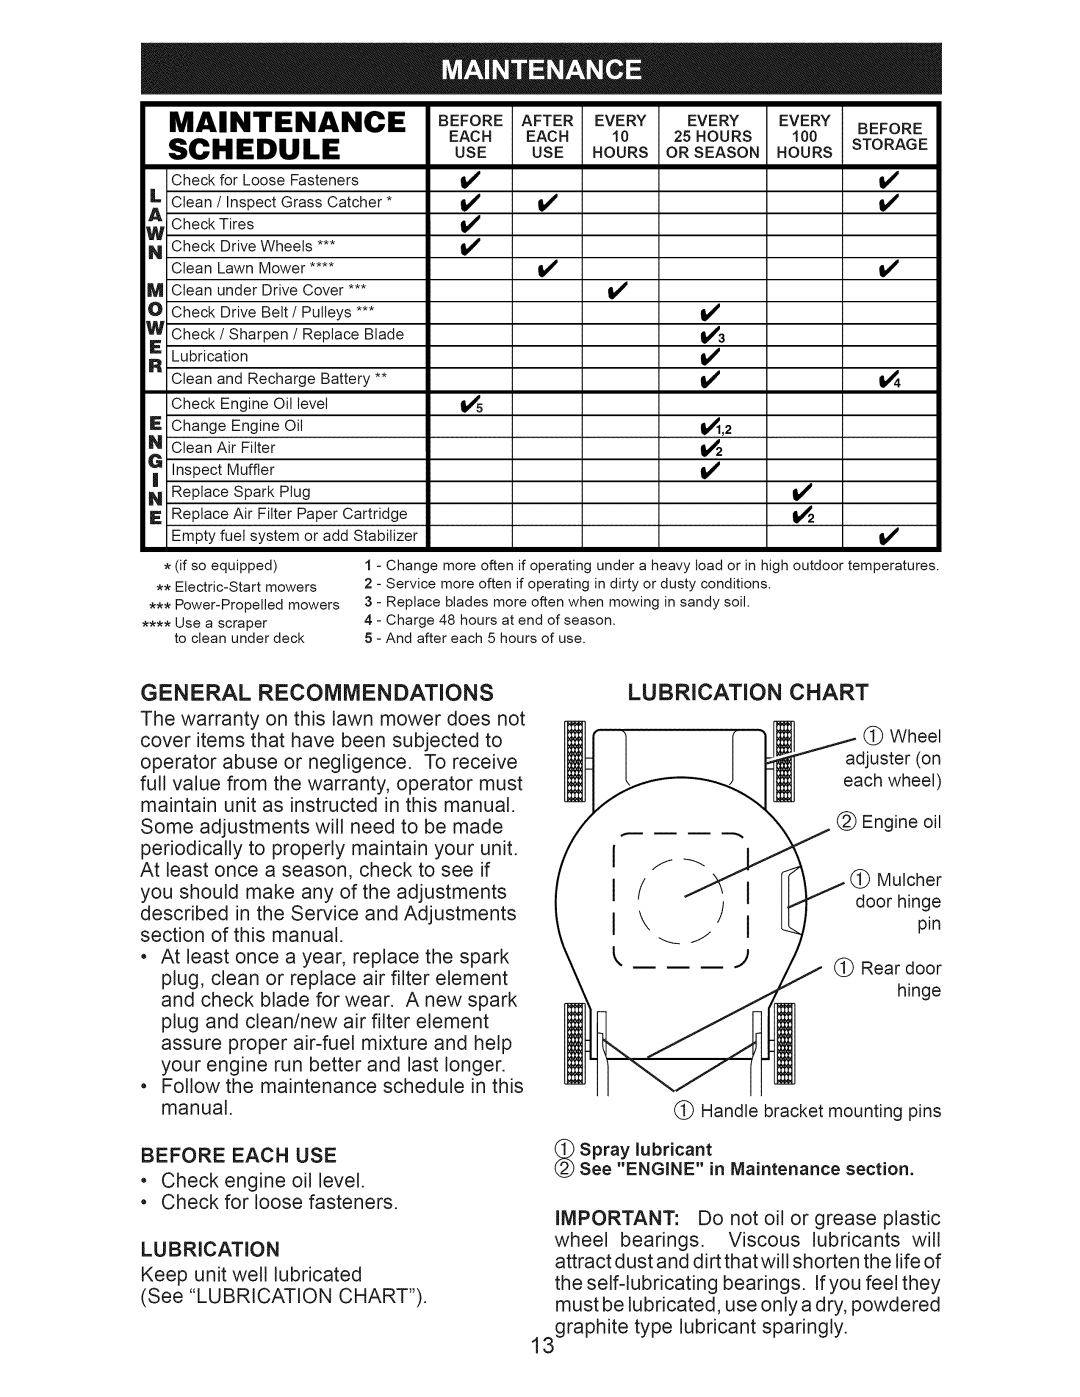 Craftsman 917.374101 manual Maintenance, Schedule, Use Hours 